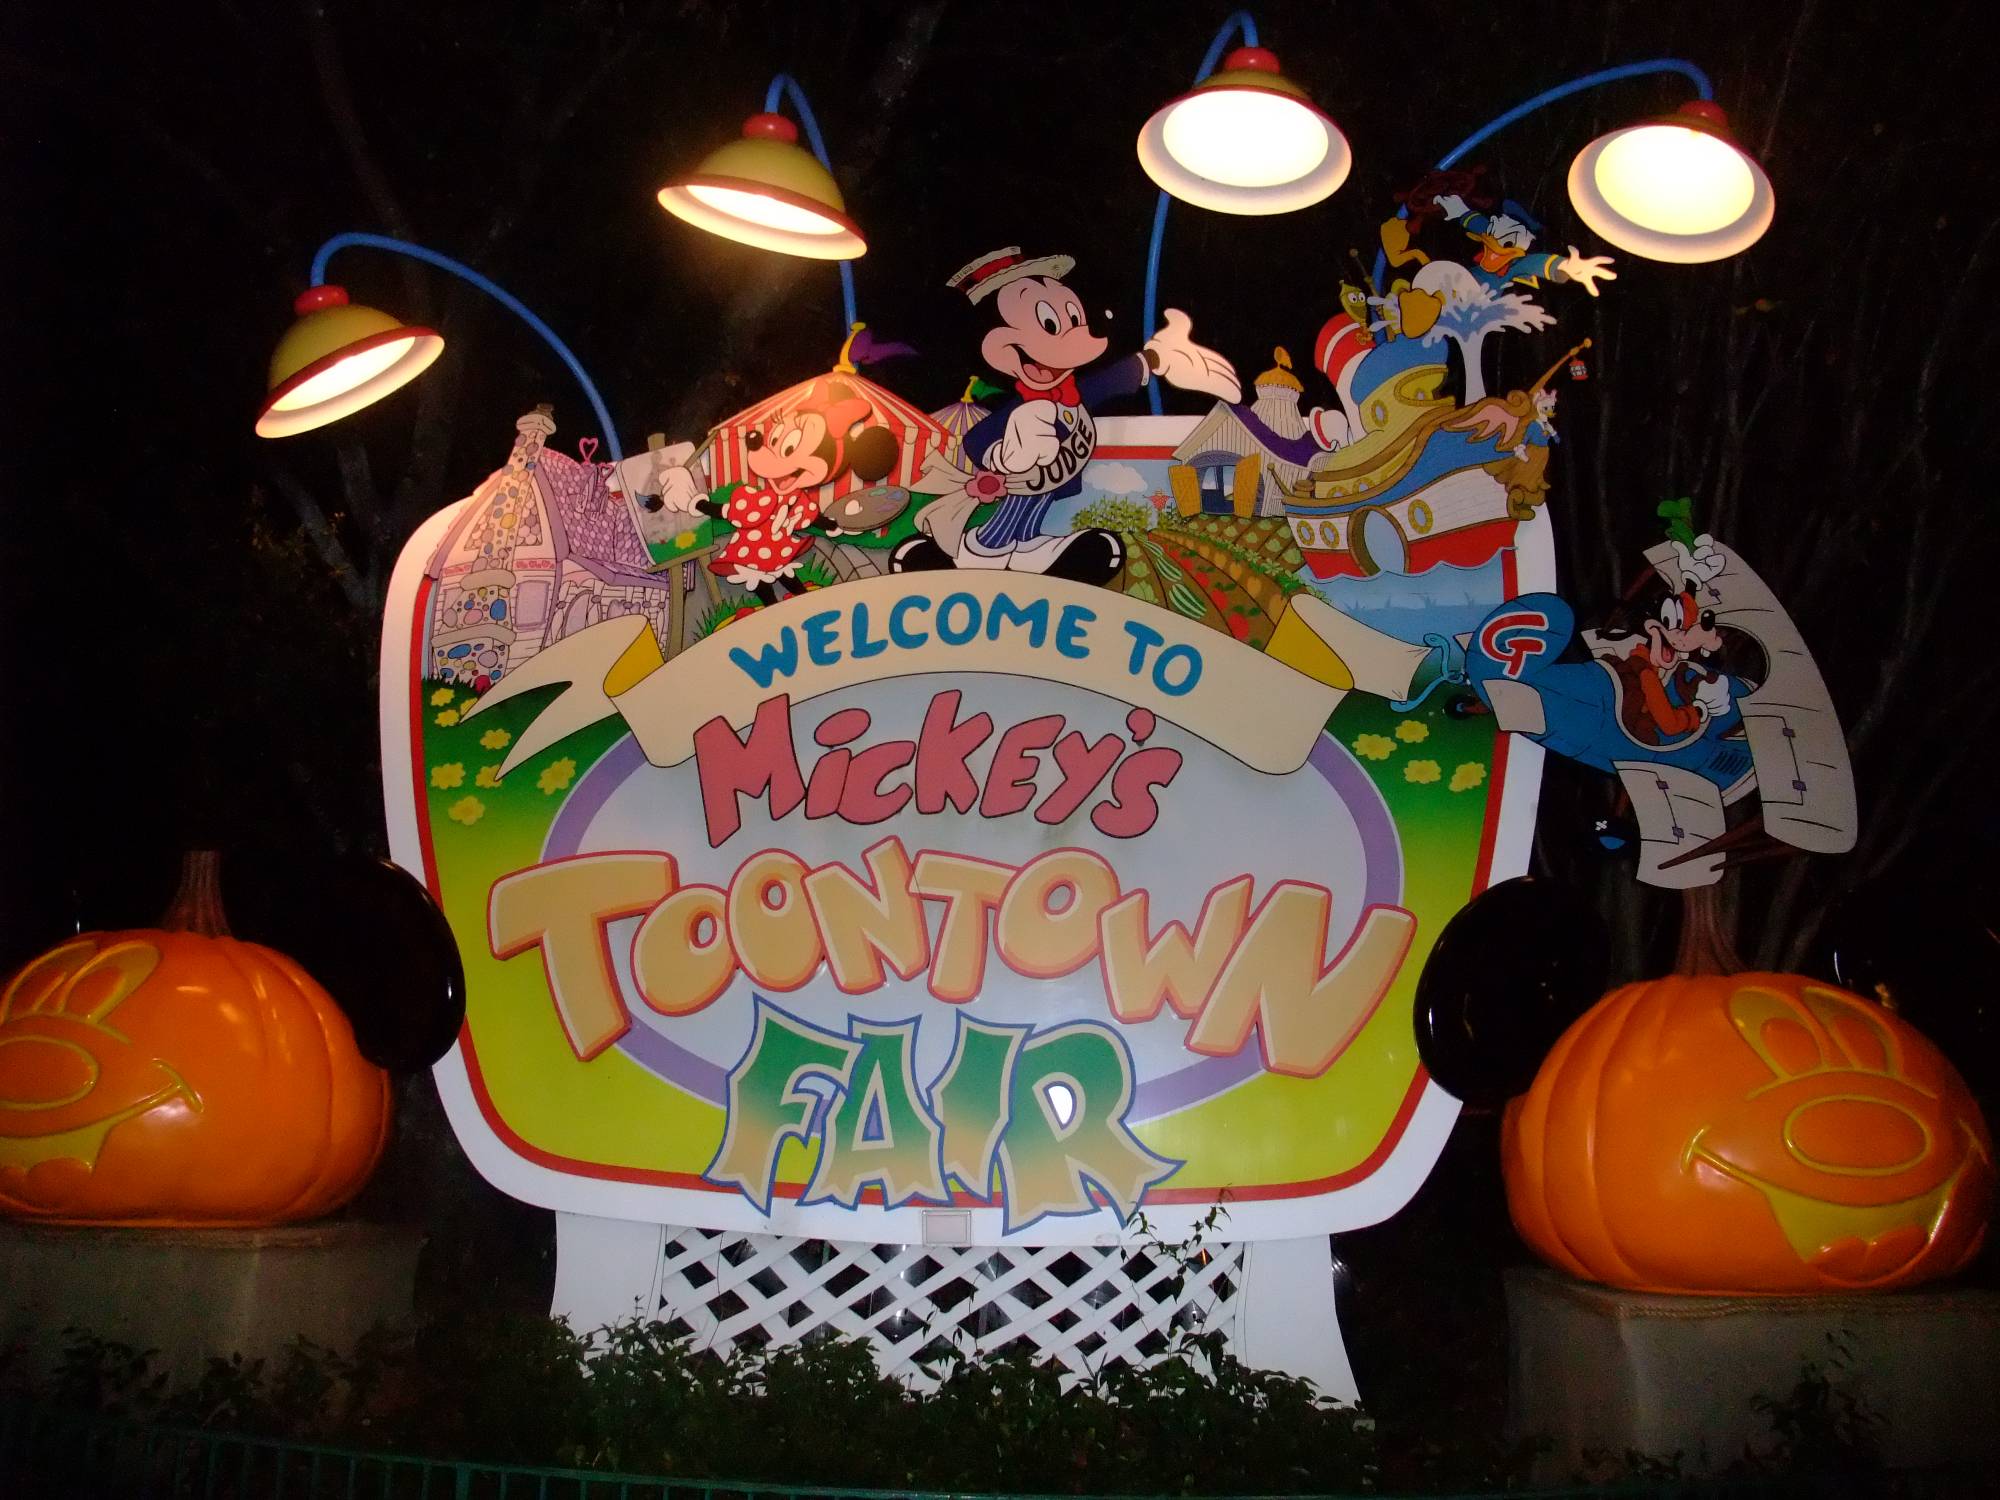 Our last time to Toontown